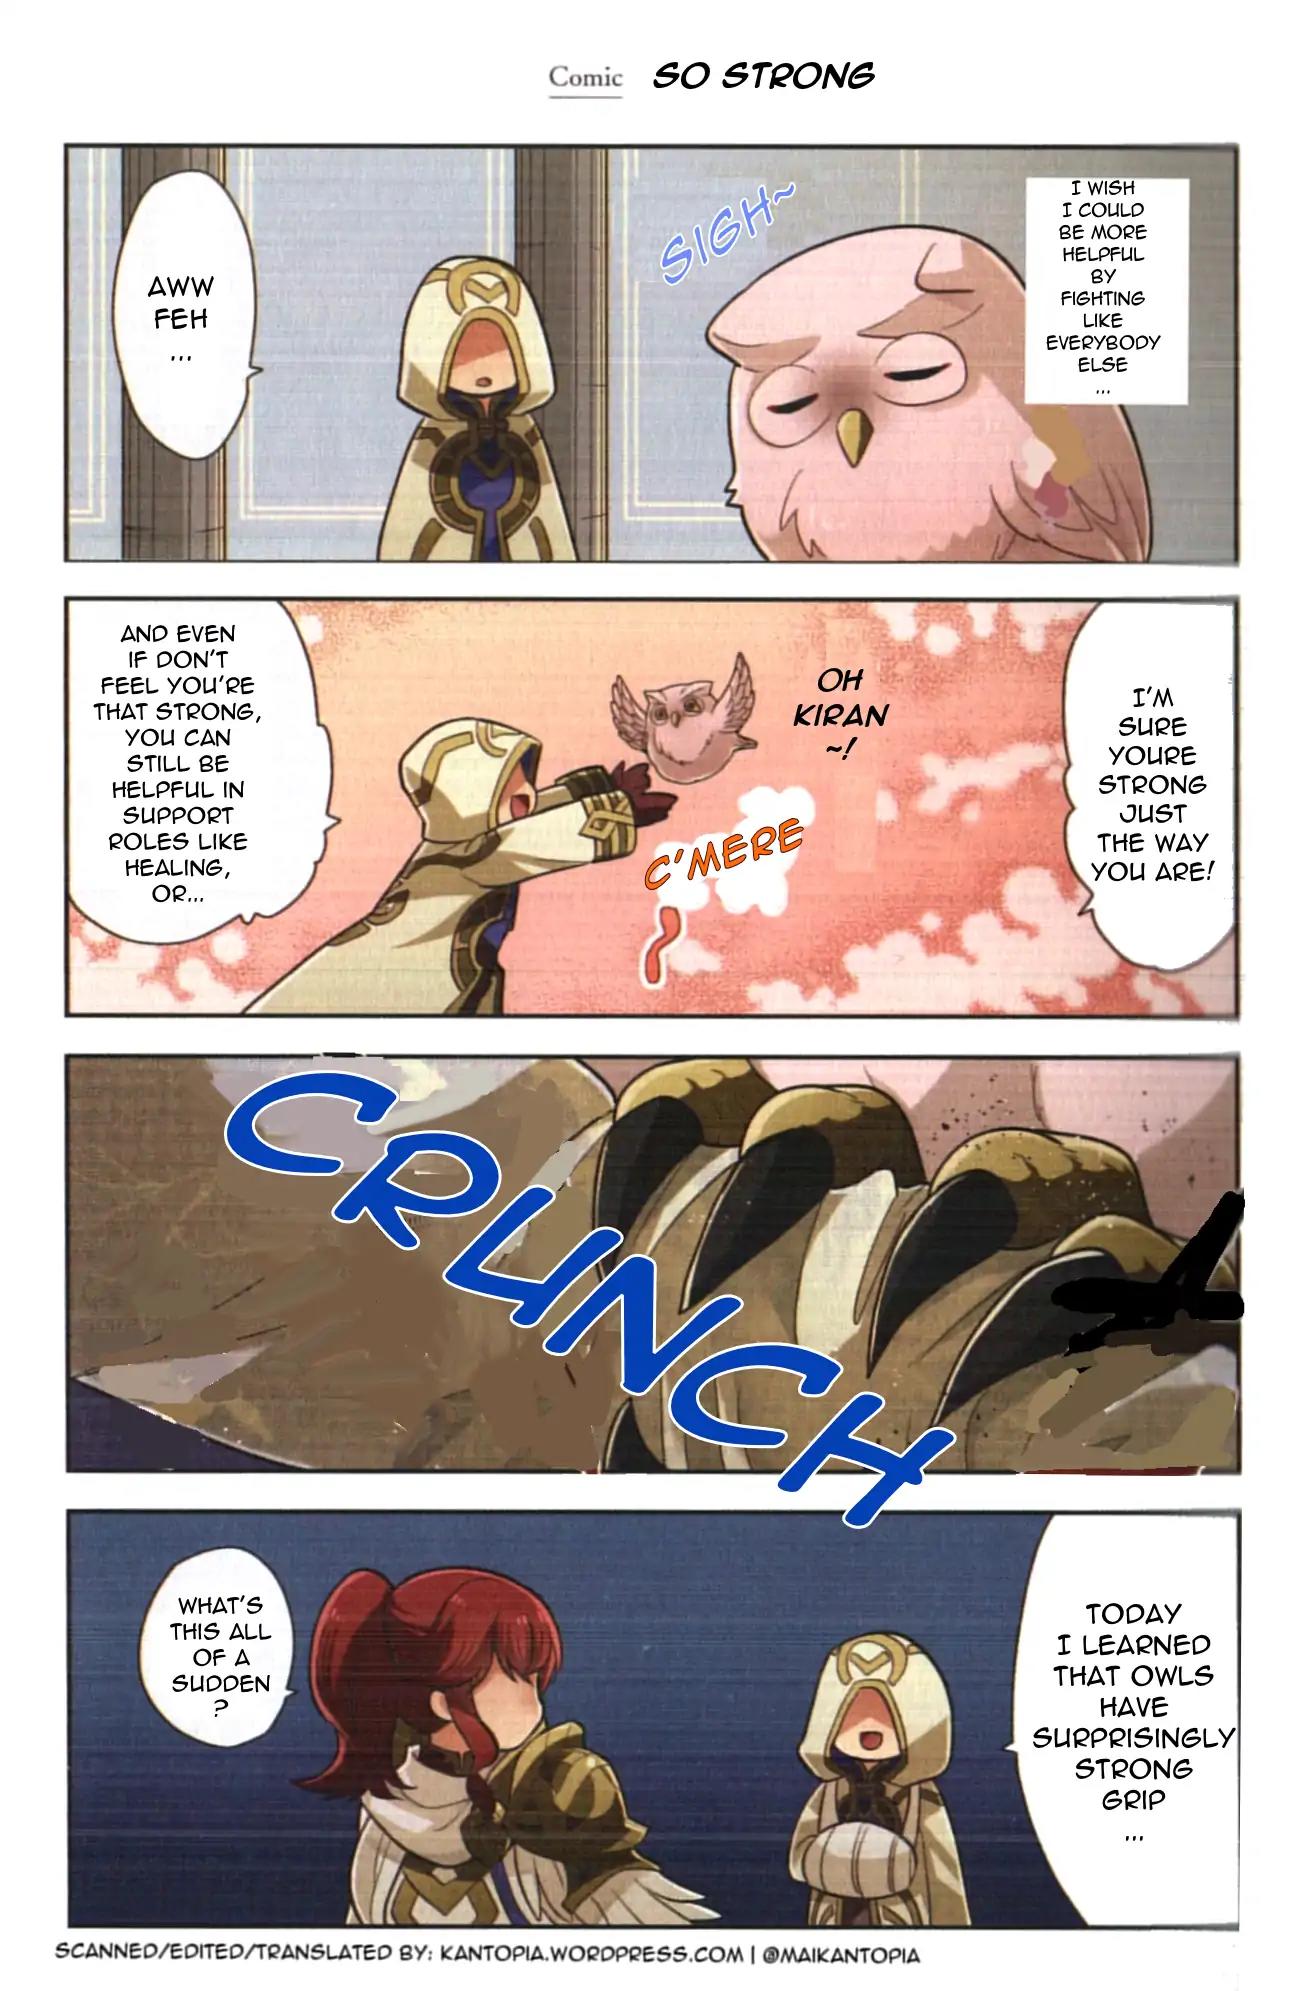 Fire Emblem Heroes Daily Lives of the Heroes Vol.1 Chapter 0.07: Character comic: